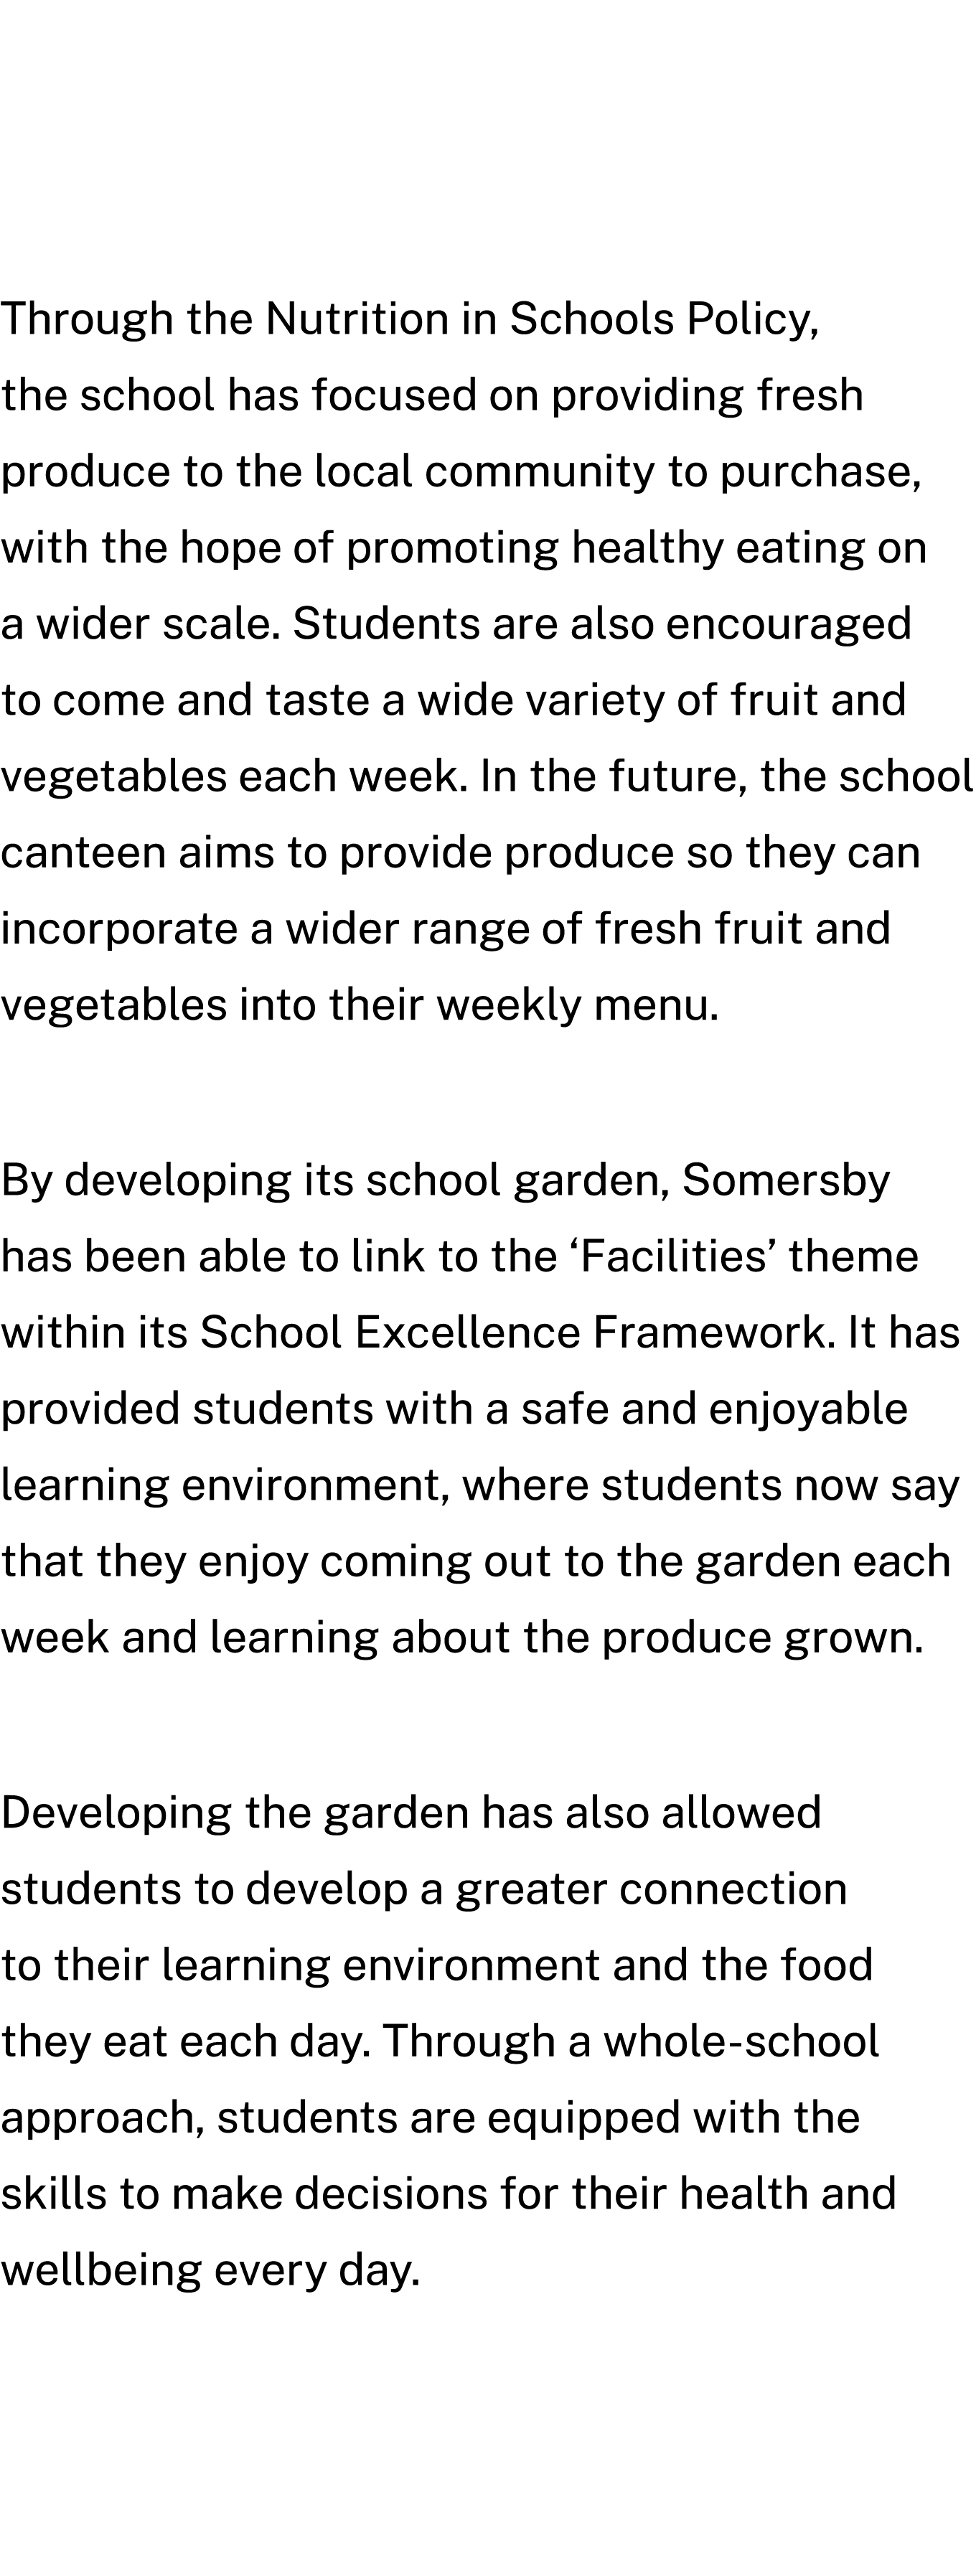 Through the Nutrition in Schools Policy, the school has focused on providing fresh produce to the local community to ...